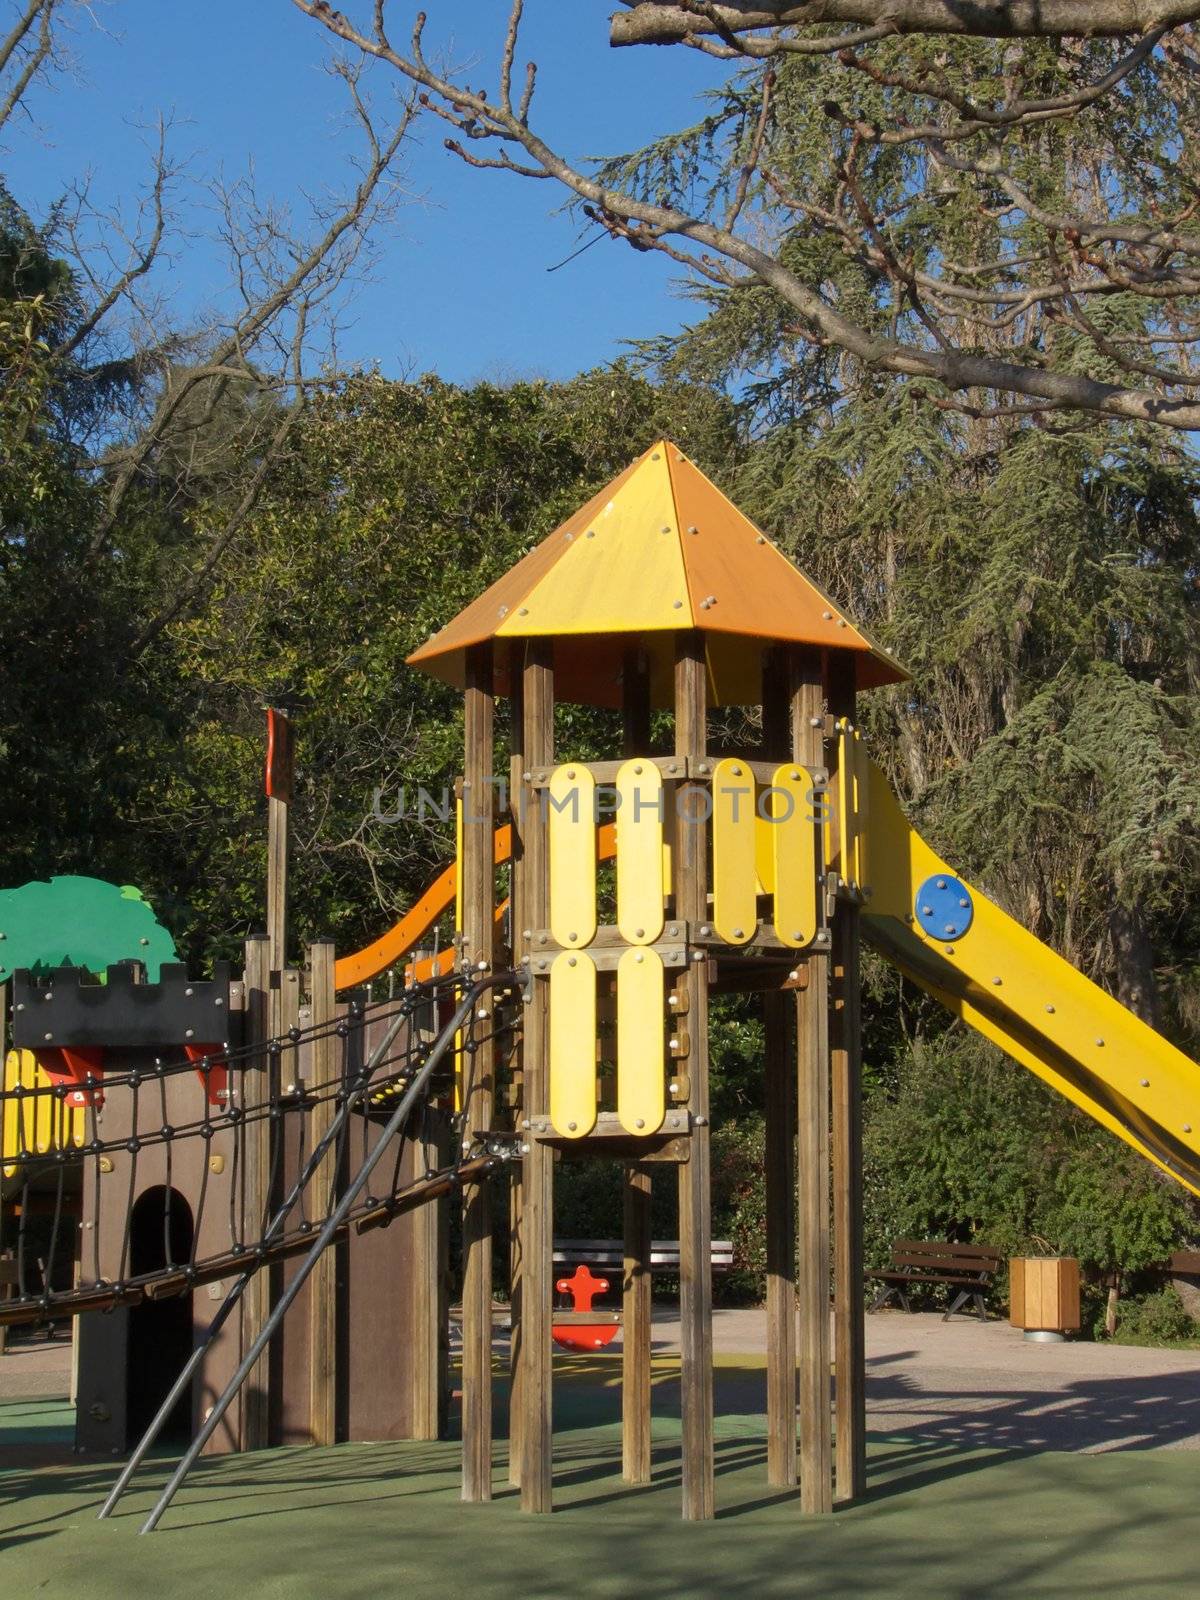 image of a playground area with tower and slide in a park